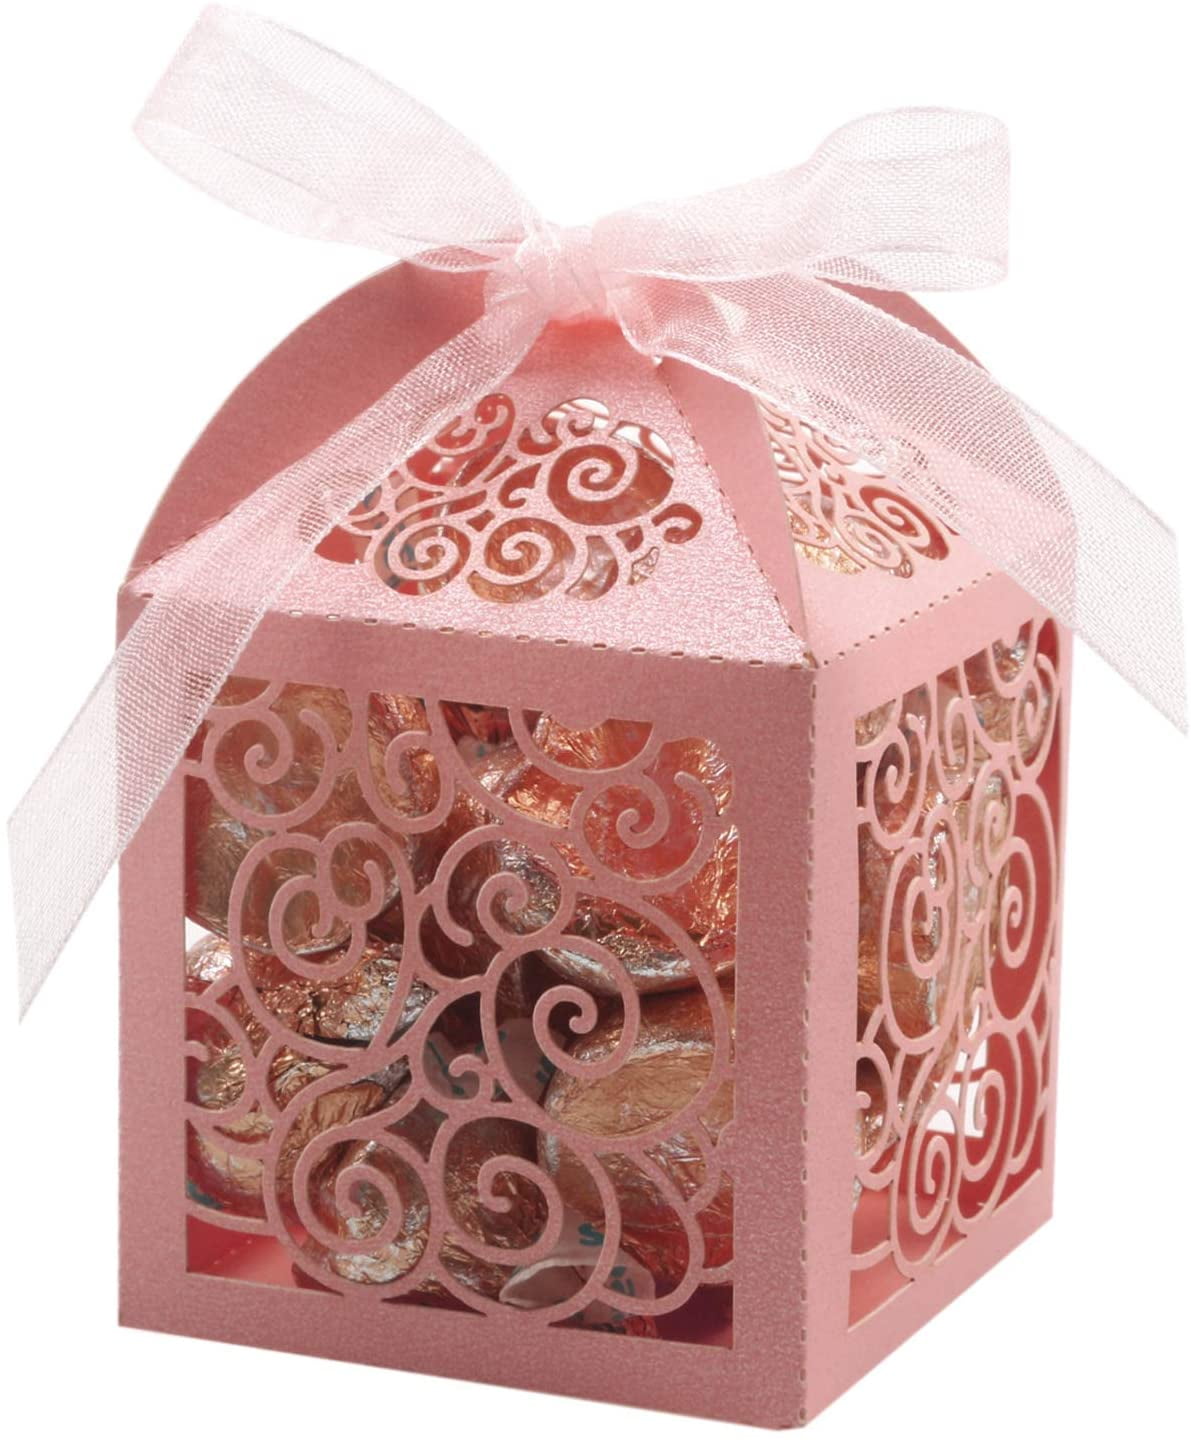 12PCS Candy Gift Paper Box Cookies Chocolate Baby Shower Wedding Party Favors 